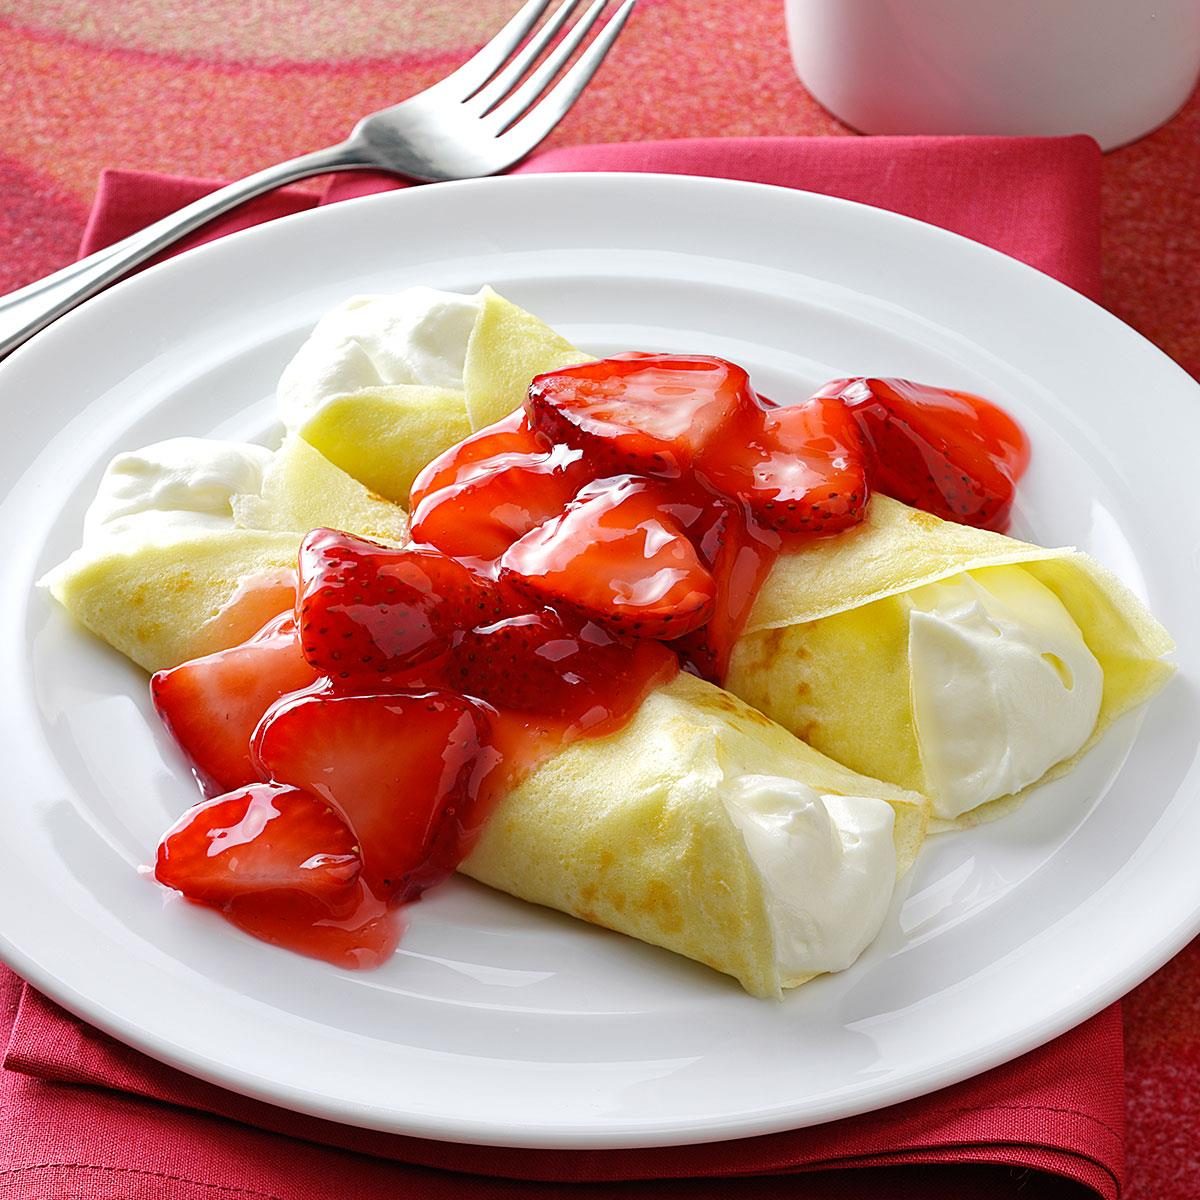 Inspired by: IHOP's Strawberry and Cream Crepes